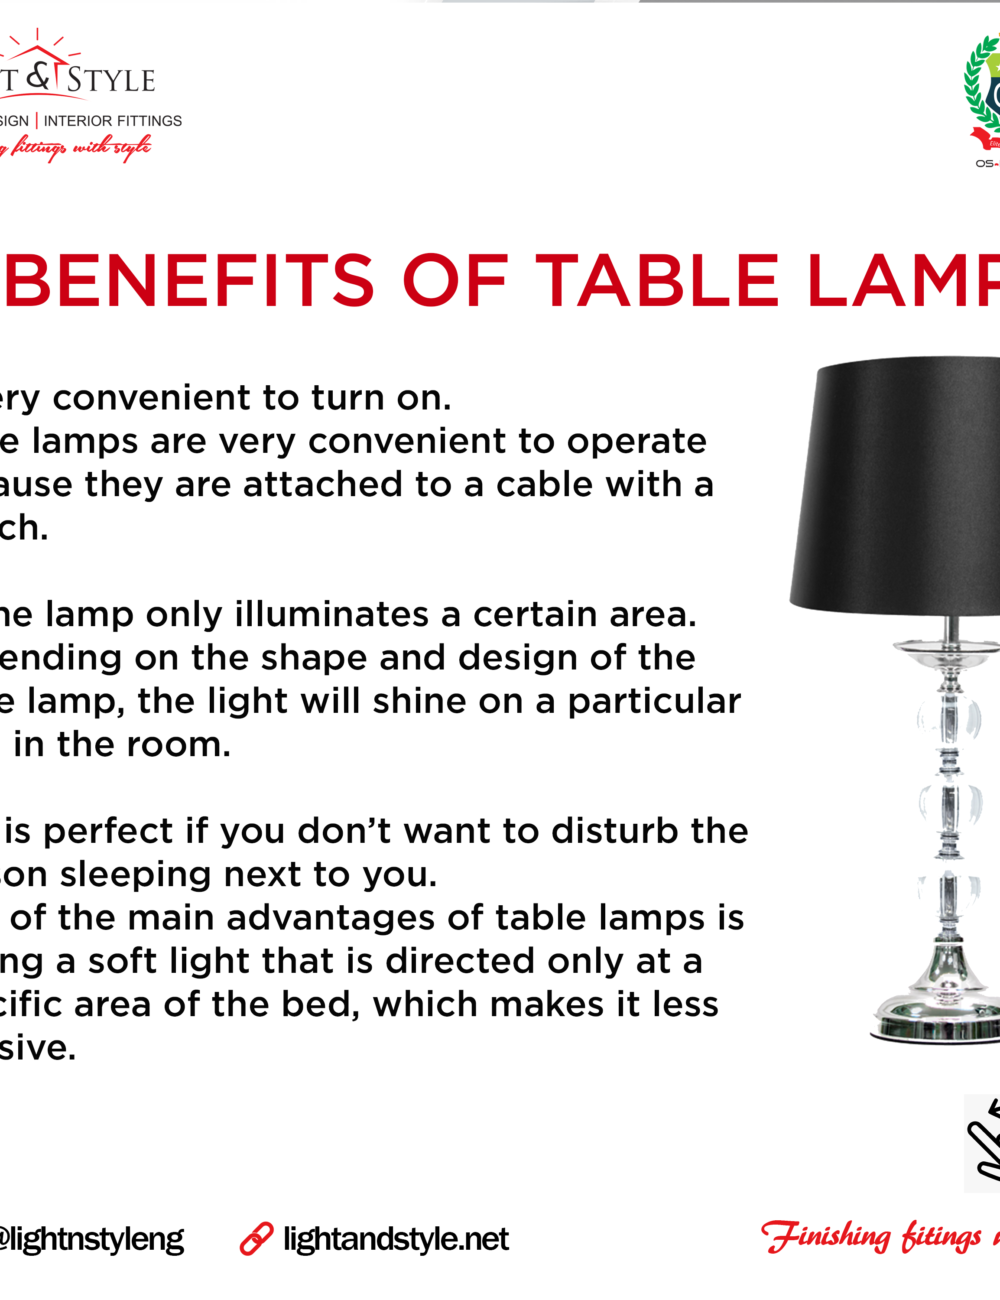 lighhtd-style-table-1